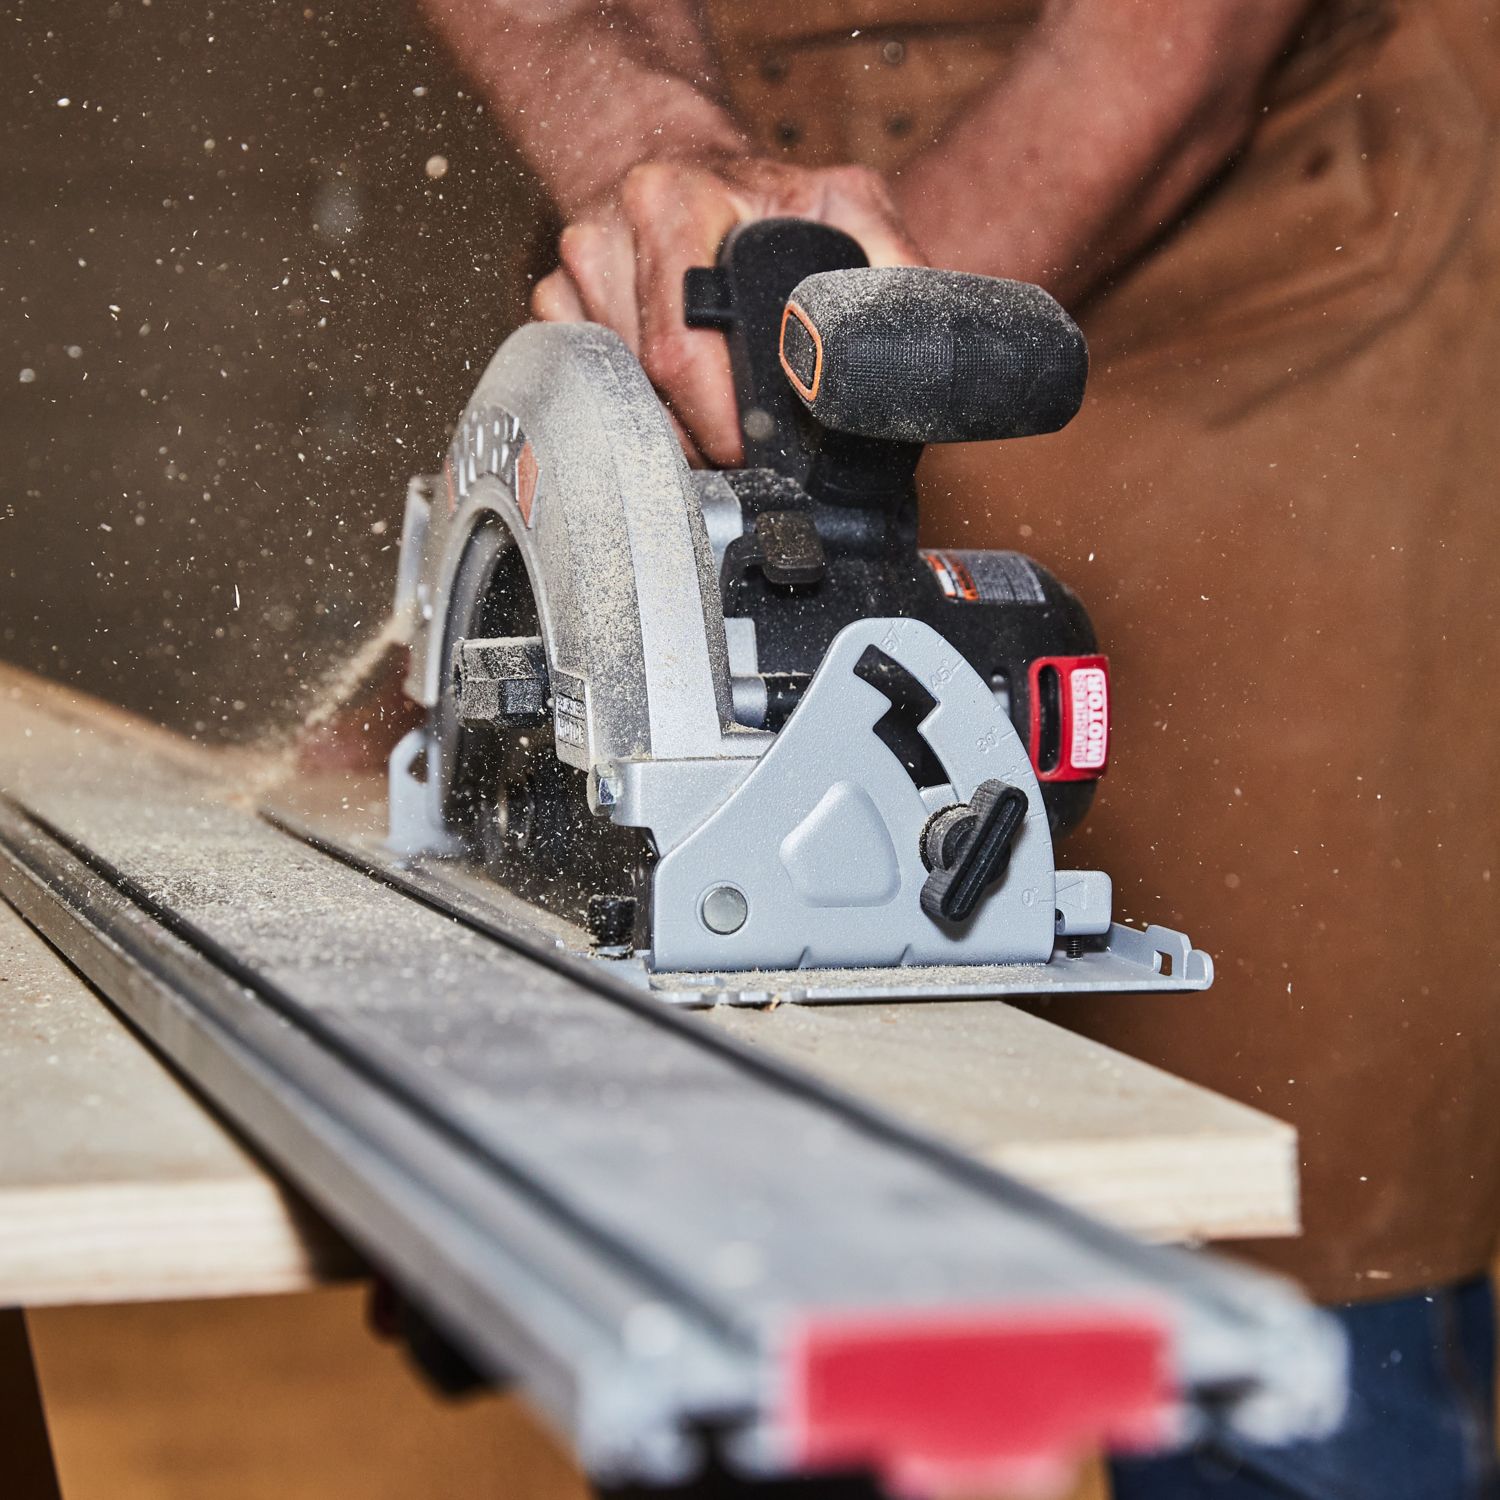 Want to Cut More Accurately With a Circular Saw? Try These Hacks and Accessories.